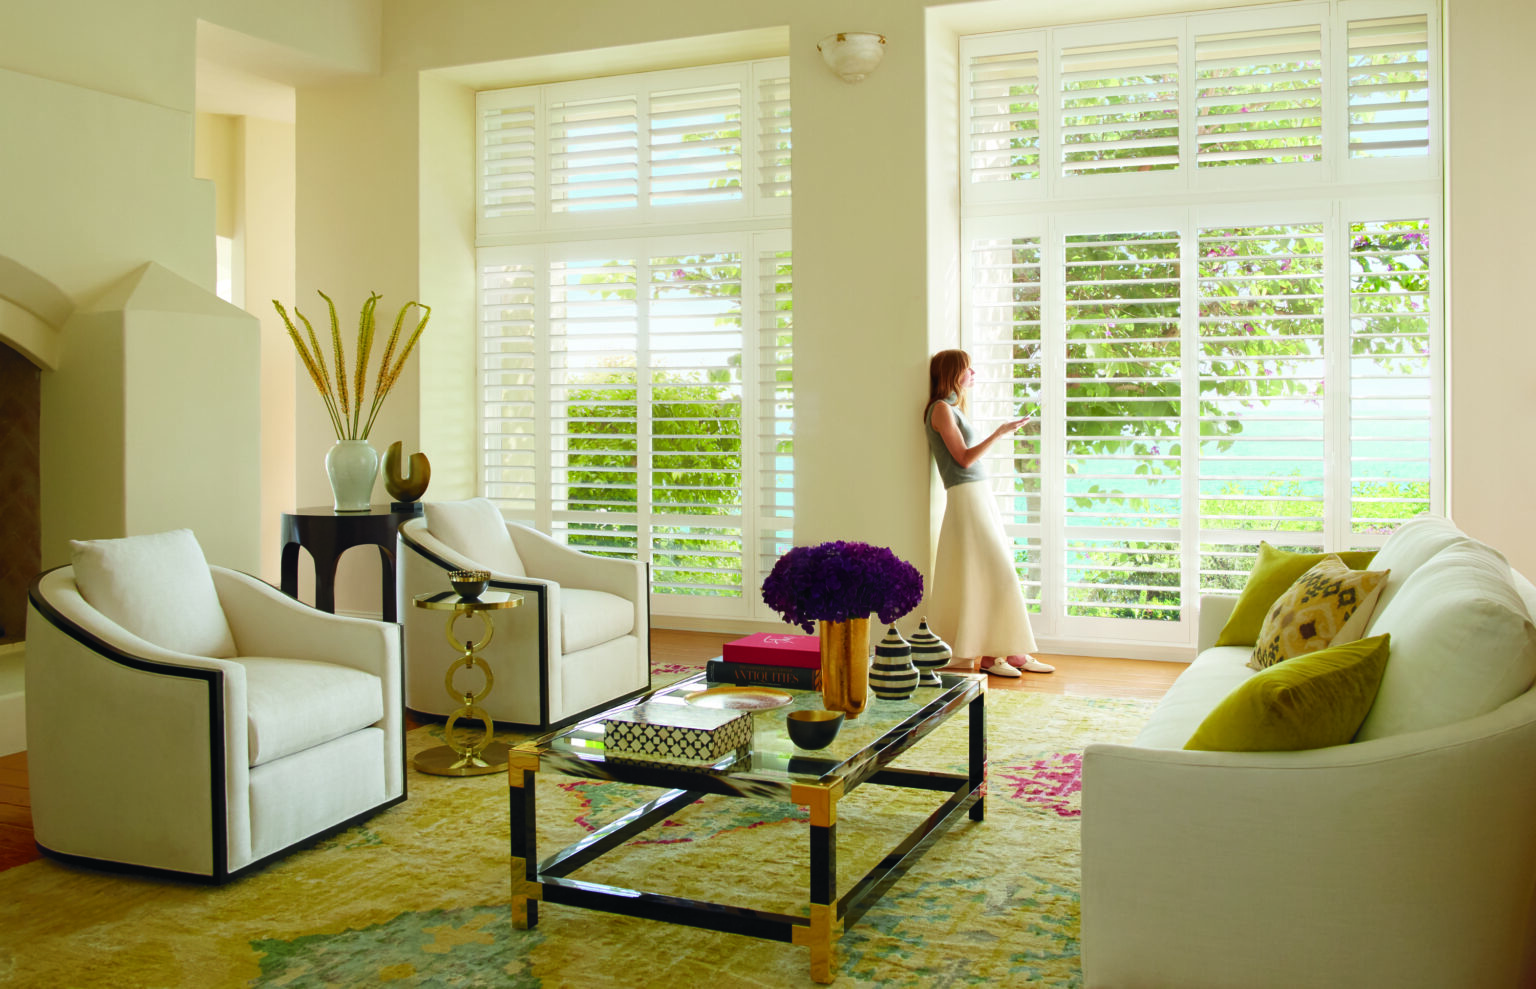 Shutters-timeless, versatile, personalize to meet your needs (1) (1)